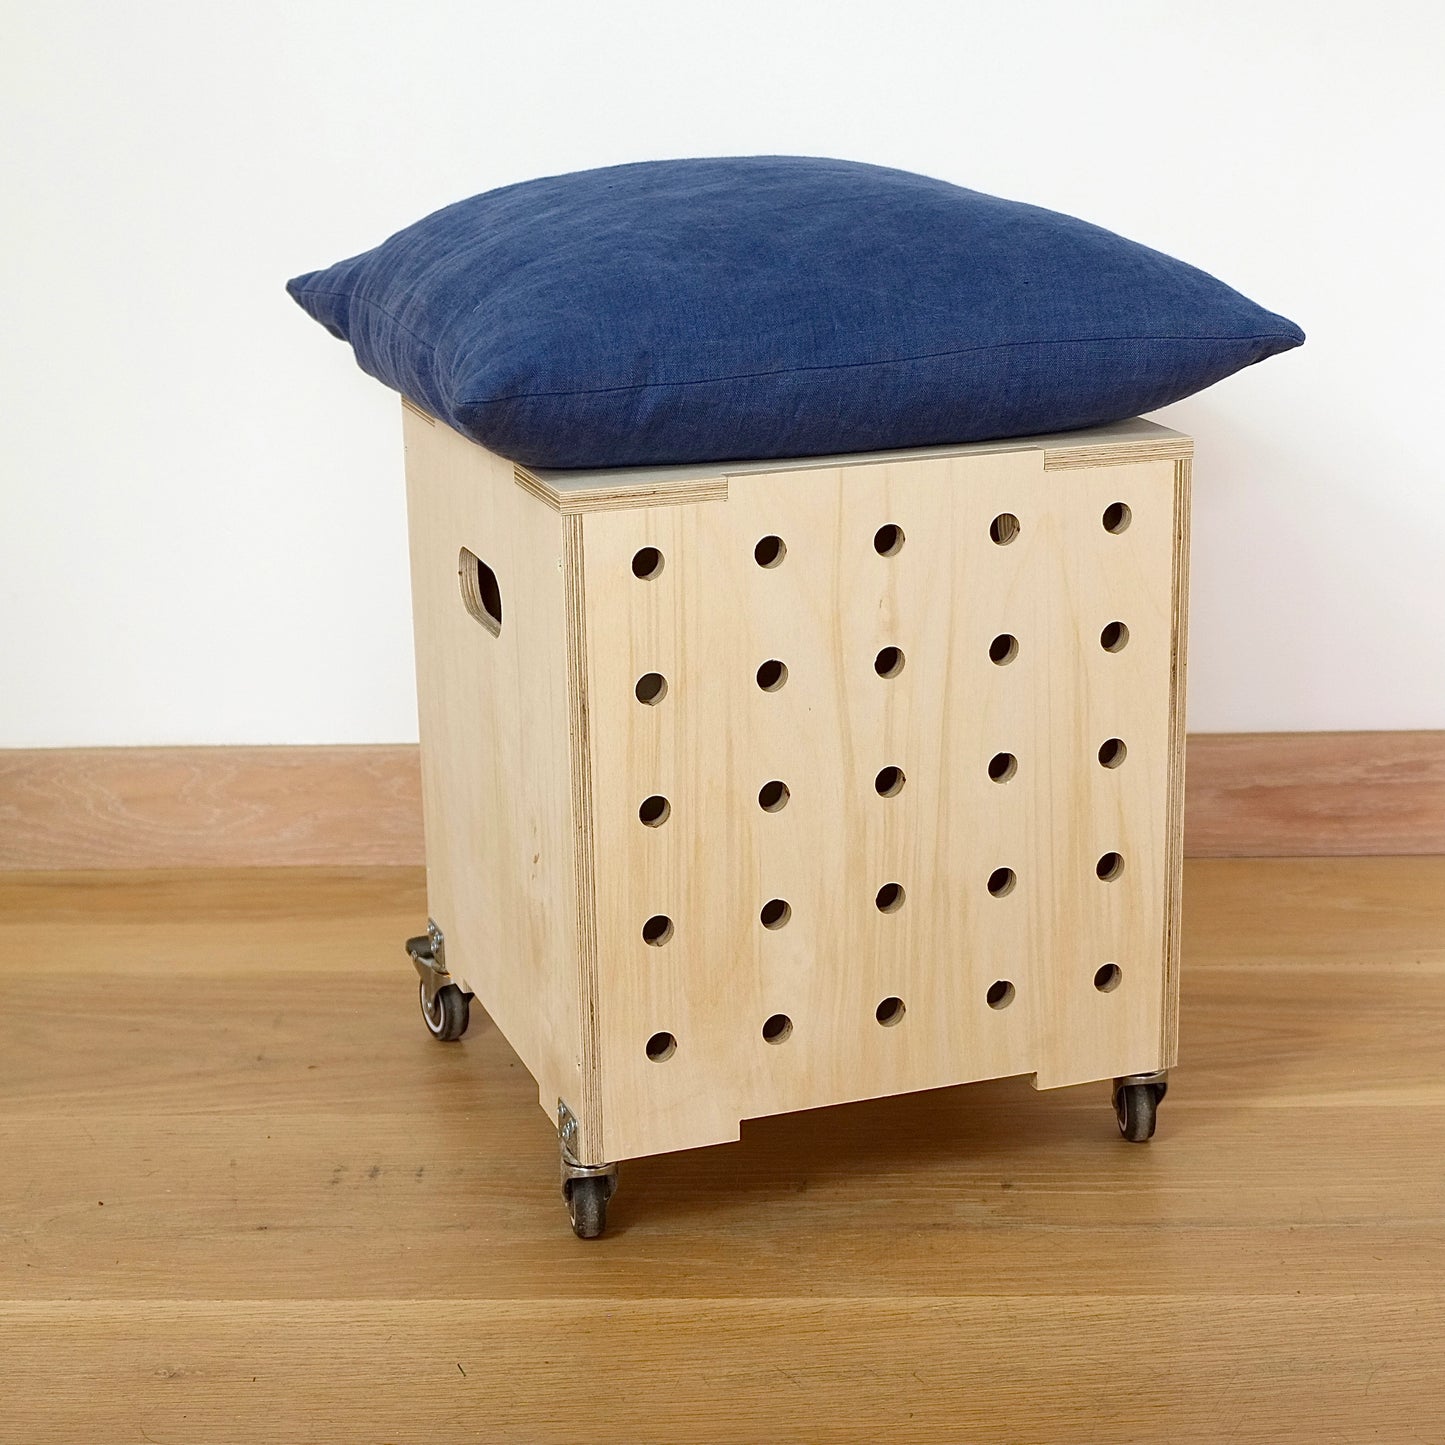 A simple pale wooden square shaped storage crate, faces diagonally to the right and sits on a wooden floor. There are five rows of holes cut in the front facet, it has castors and a lid with cushion on top.